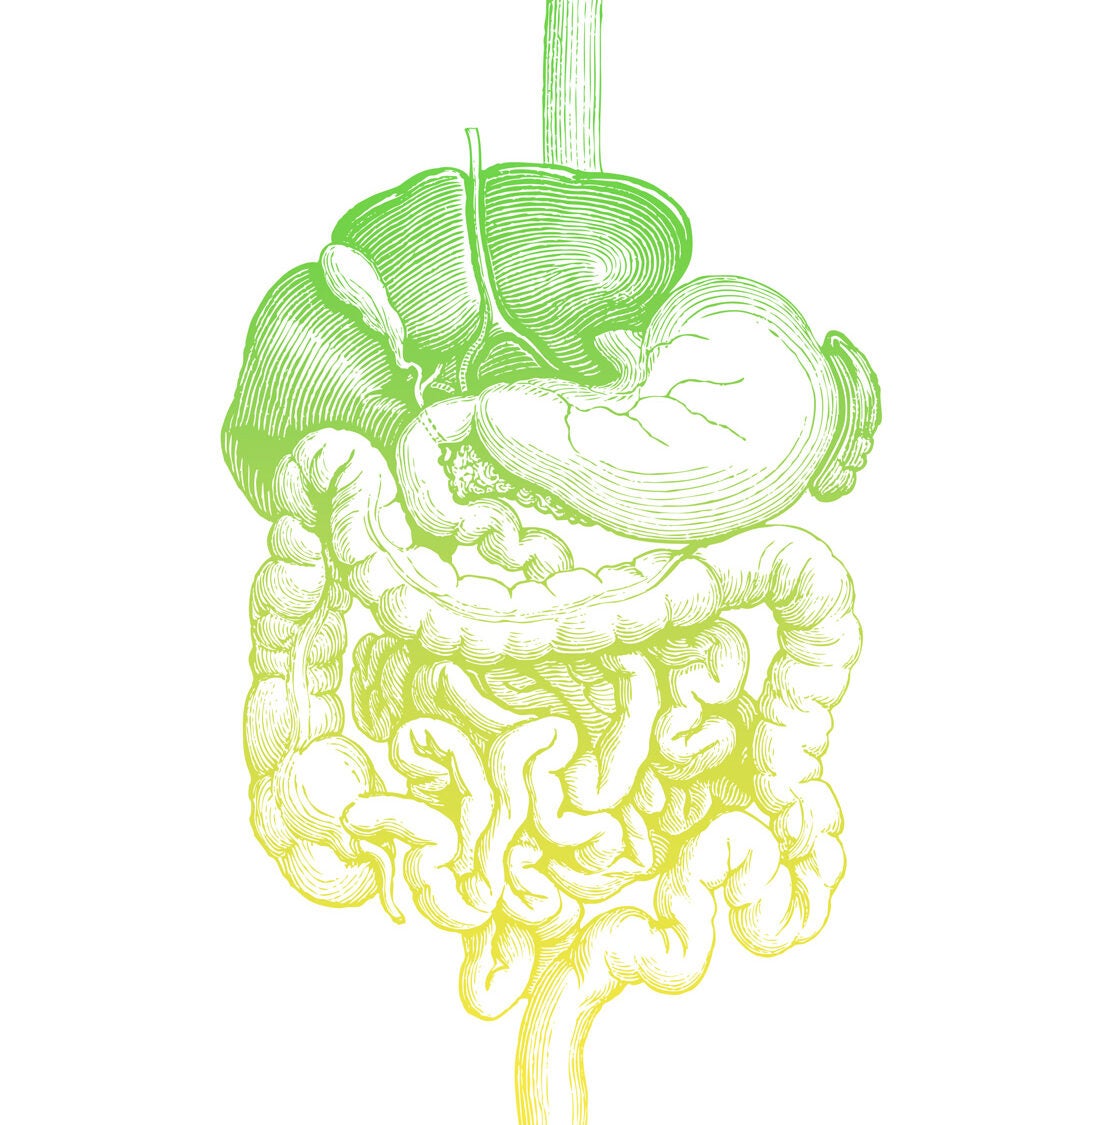 graphic of gut with green to yellow gradient overlayed